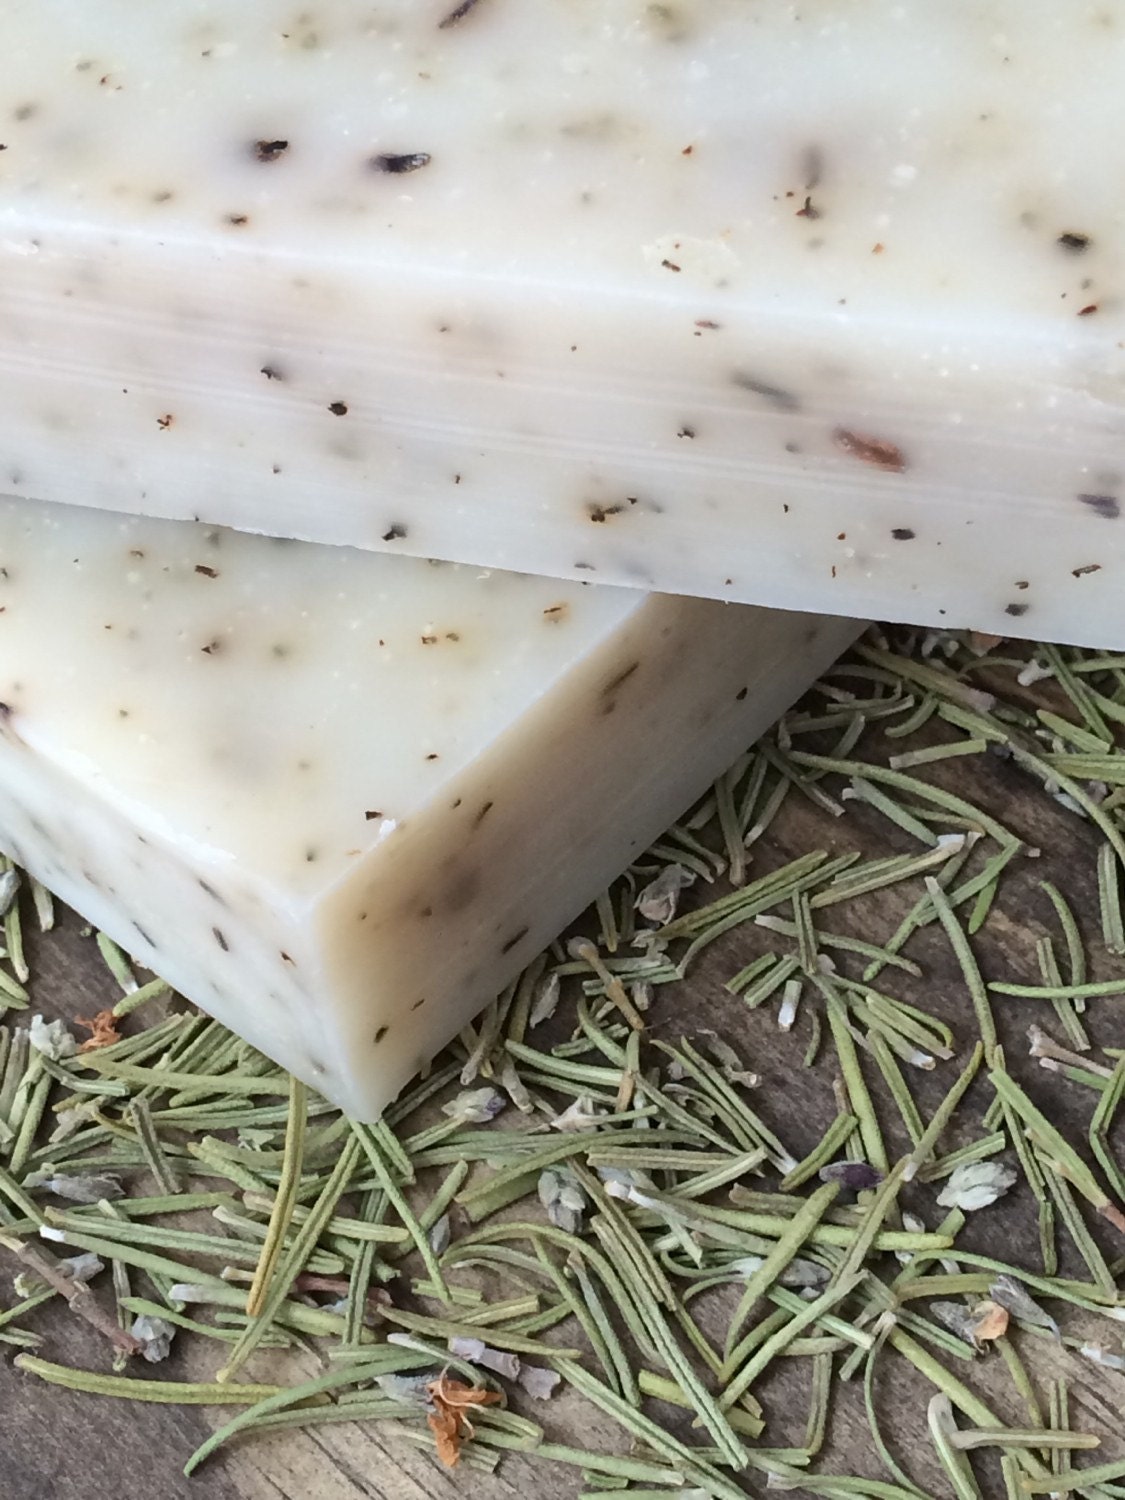 Sasquatch’s Rosemary & Thyme | Cold Process Soap